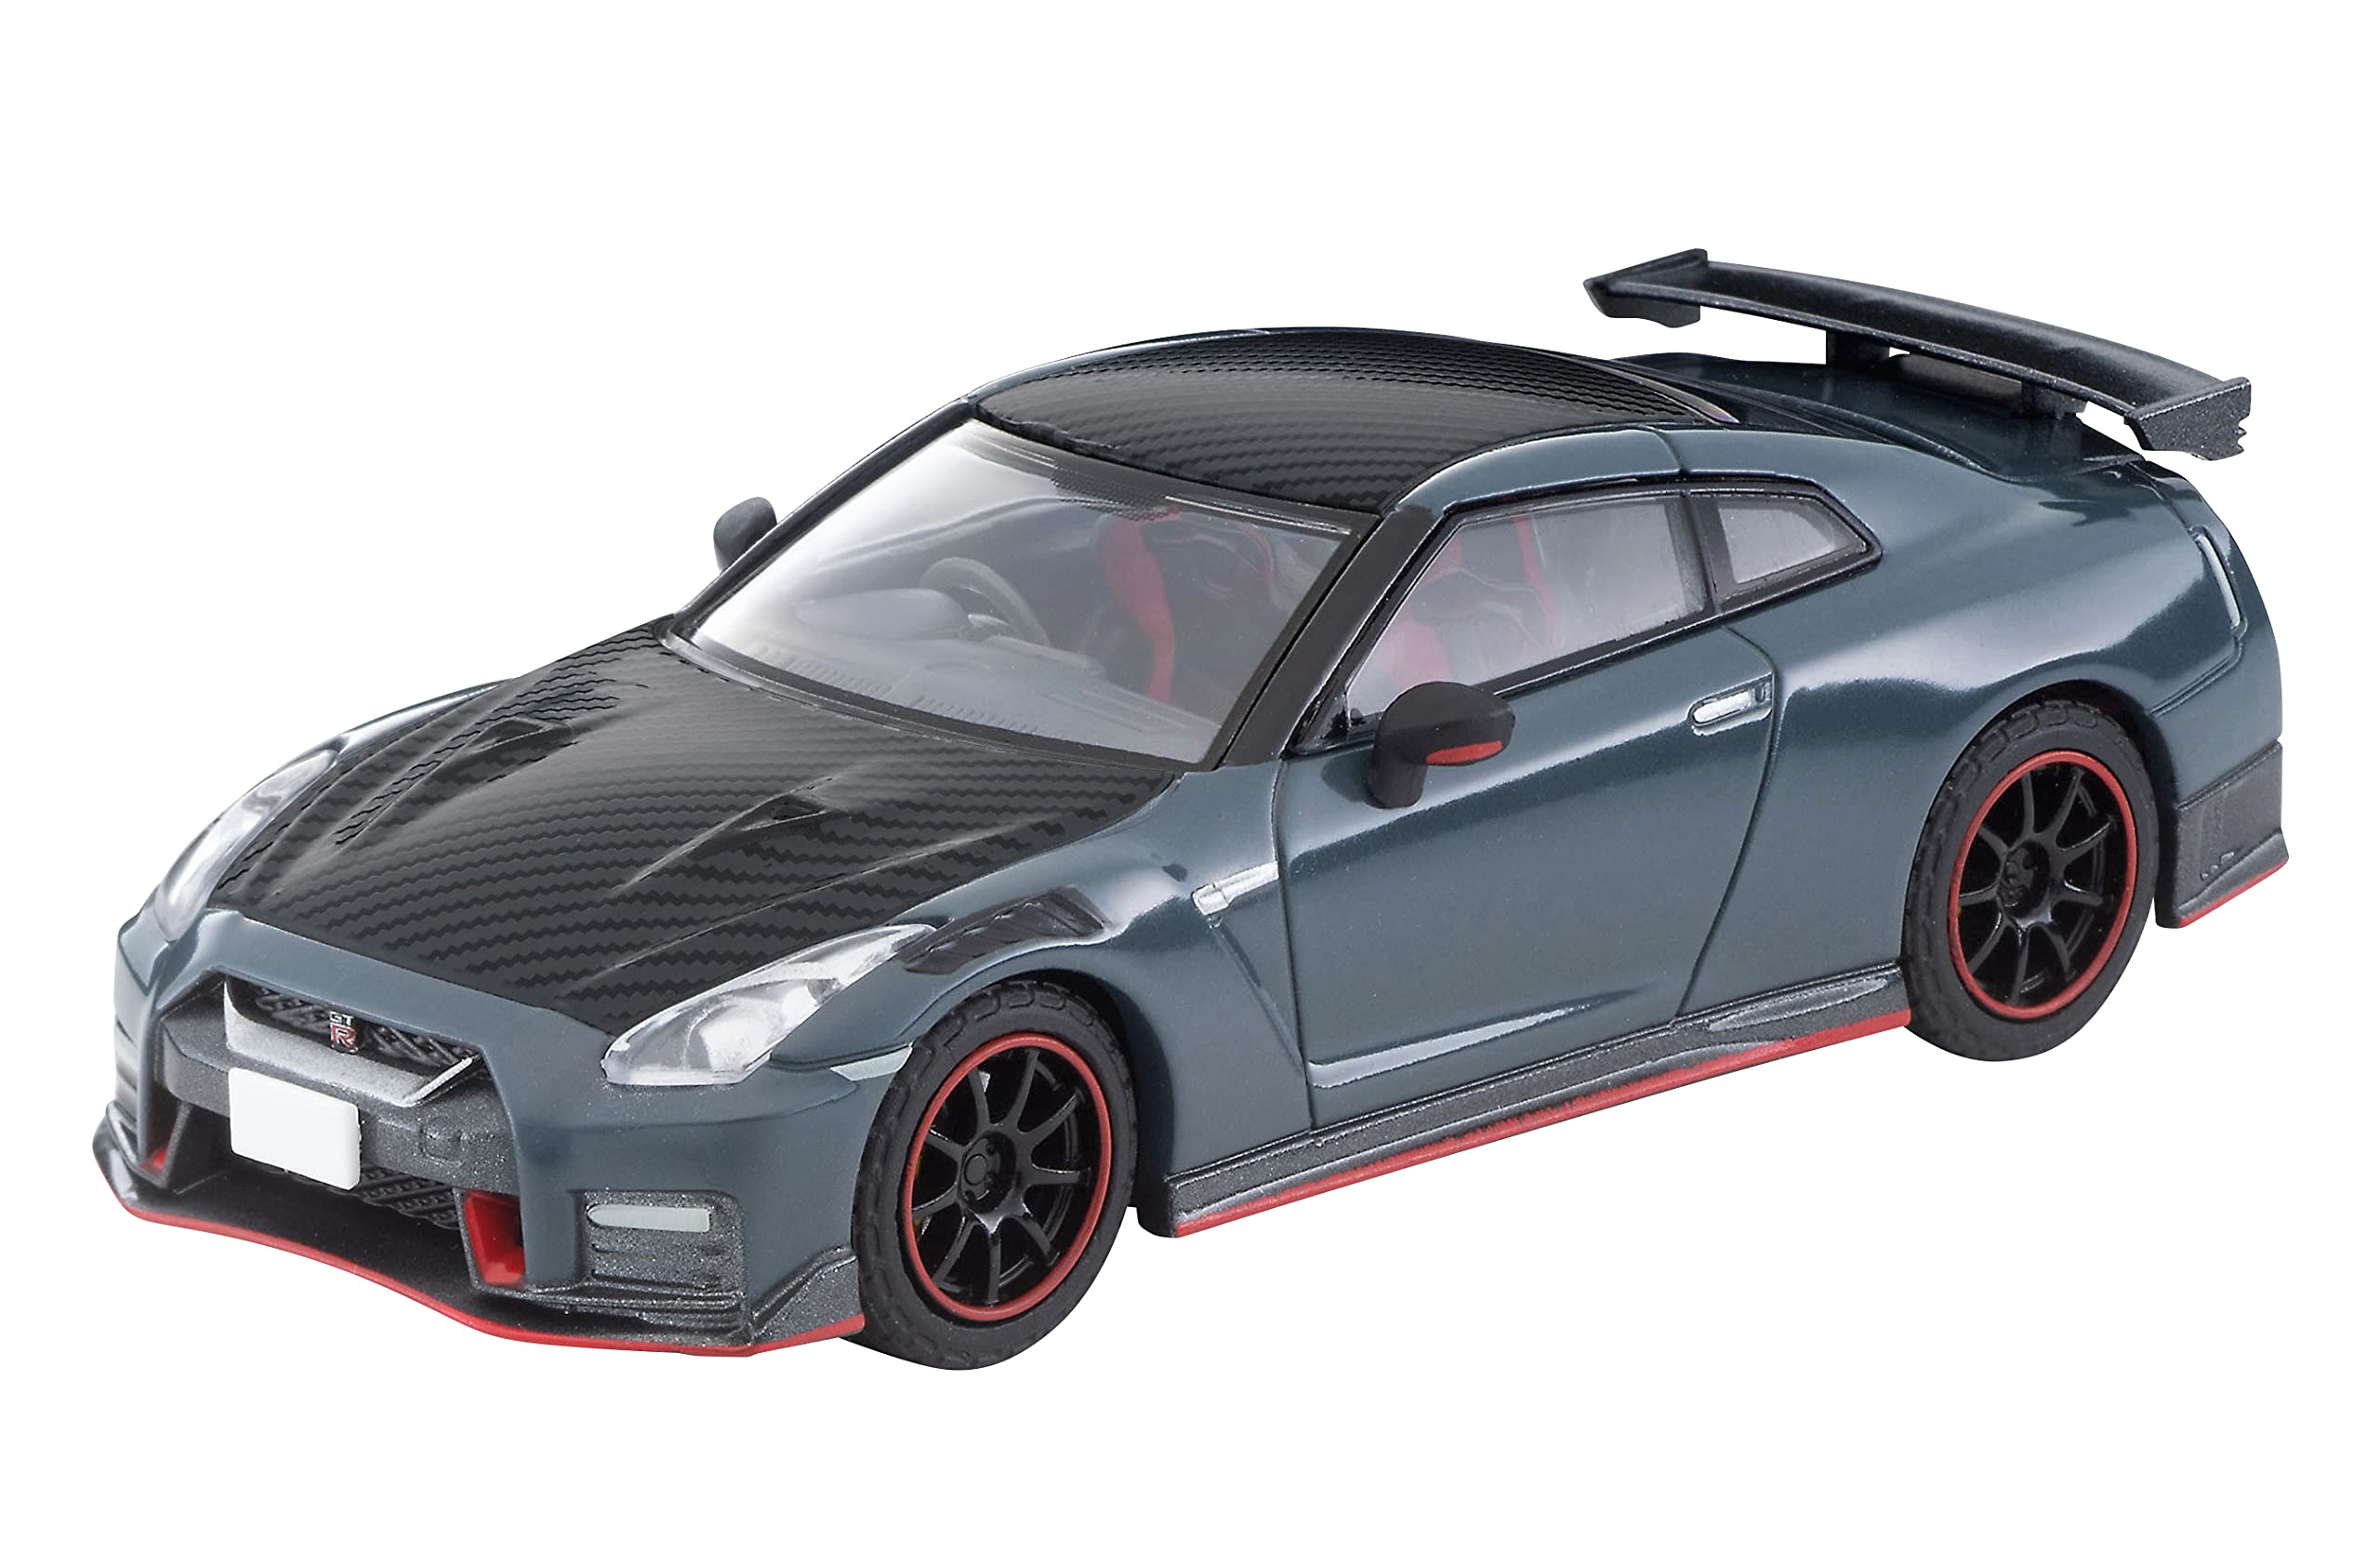 Nissan GT-R NISMO Special Edition set for fall introduction